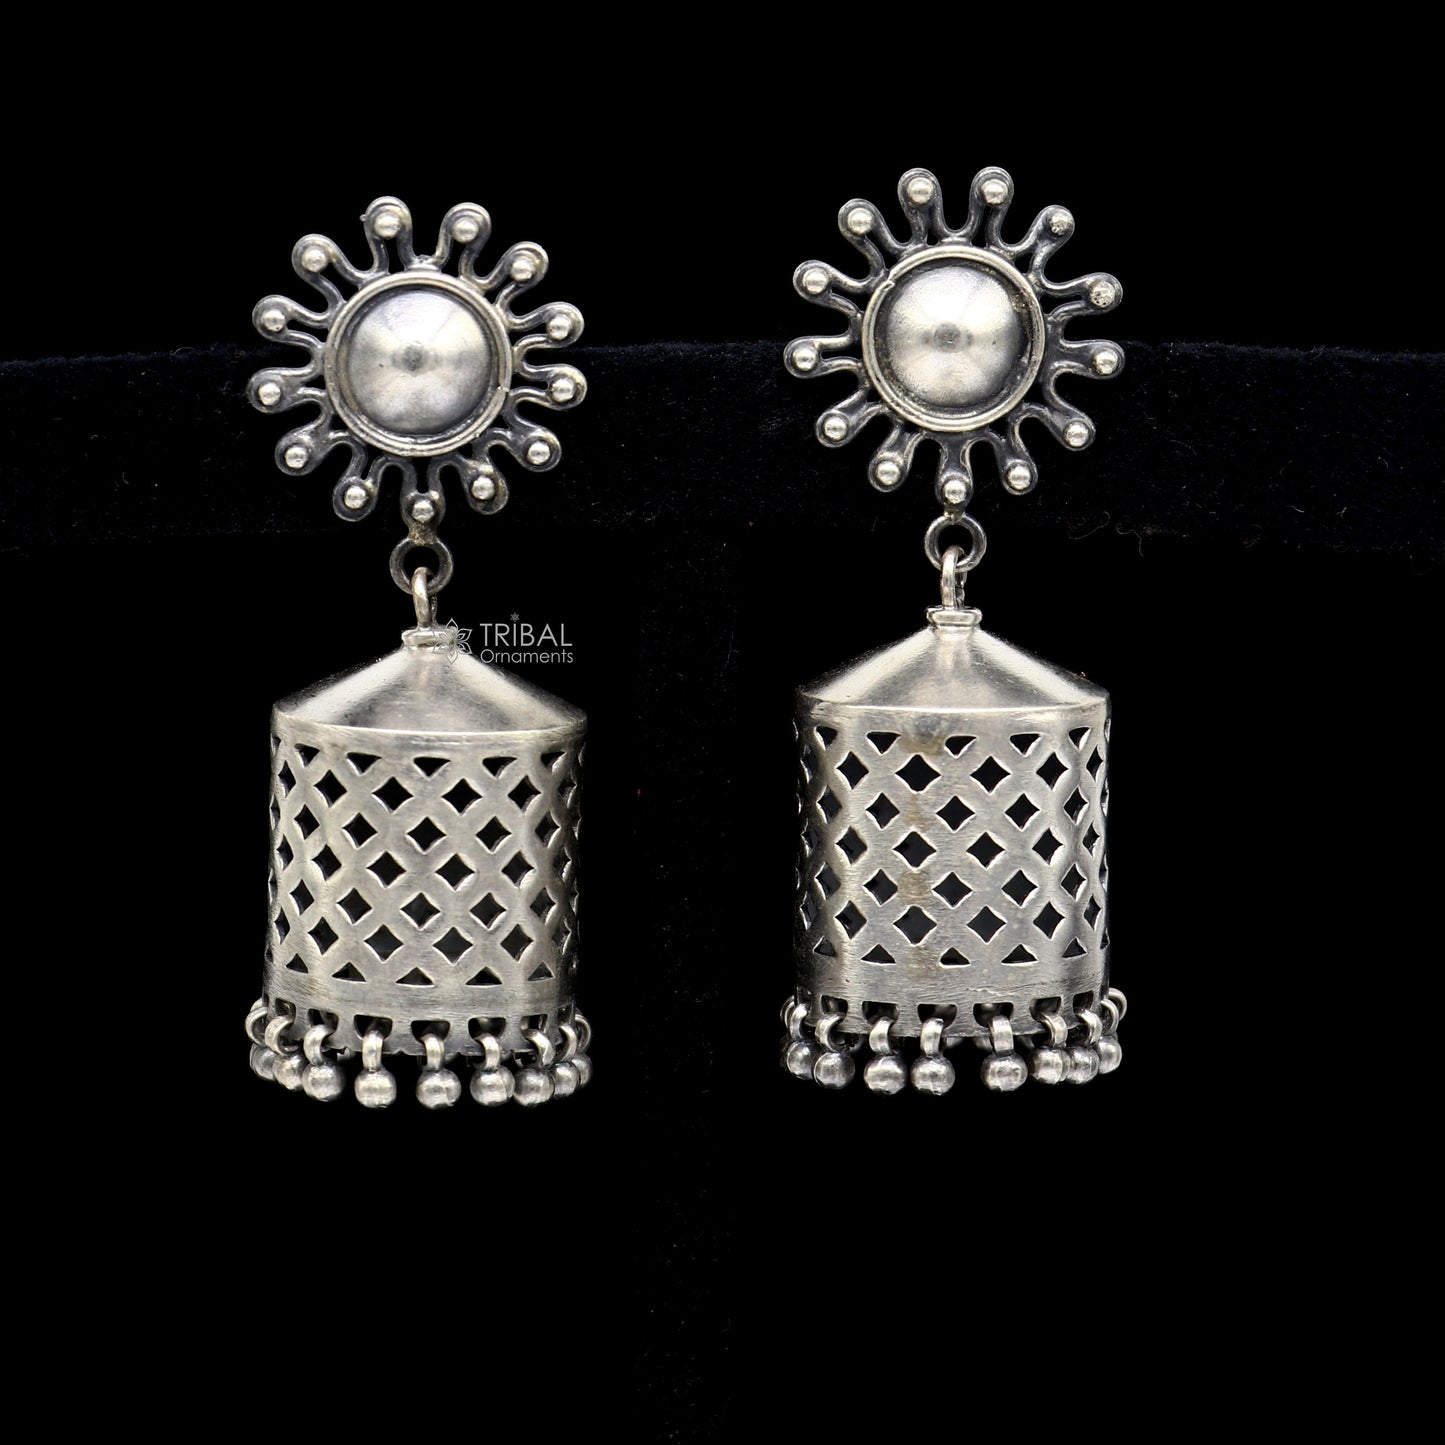 925 Sterling silver handmade traditional cultural design drop dangler jhumka earrings, best party functional Navratri jewelry s1236 - TRIBAL ORNAMENTS